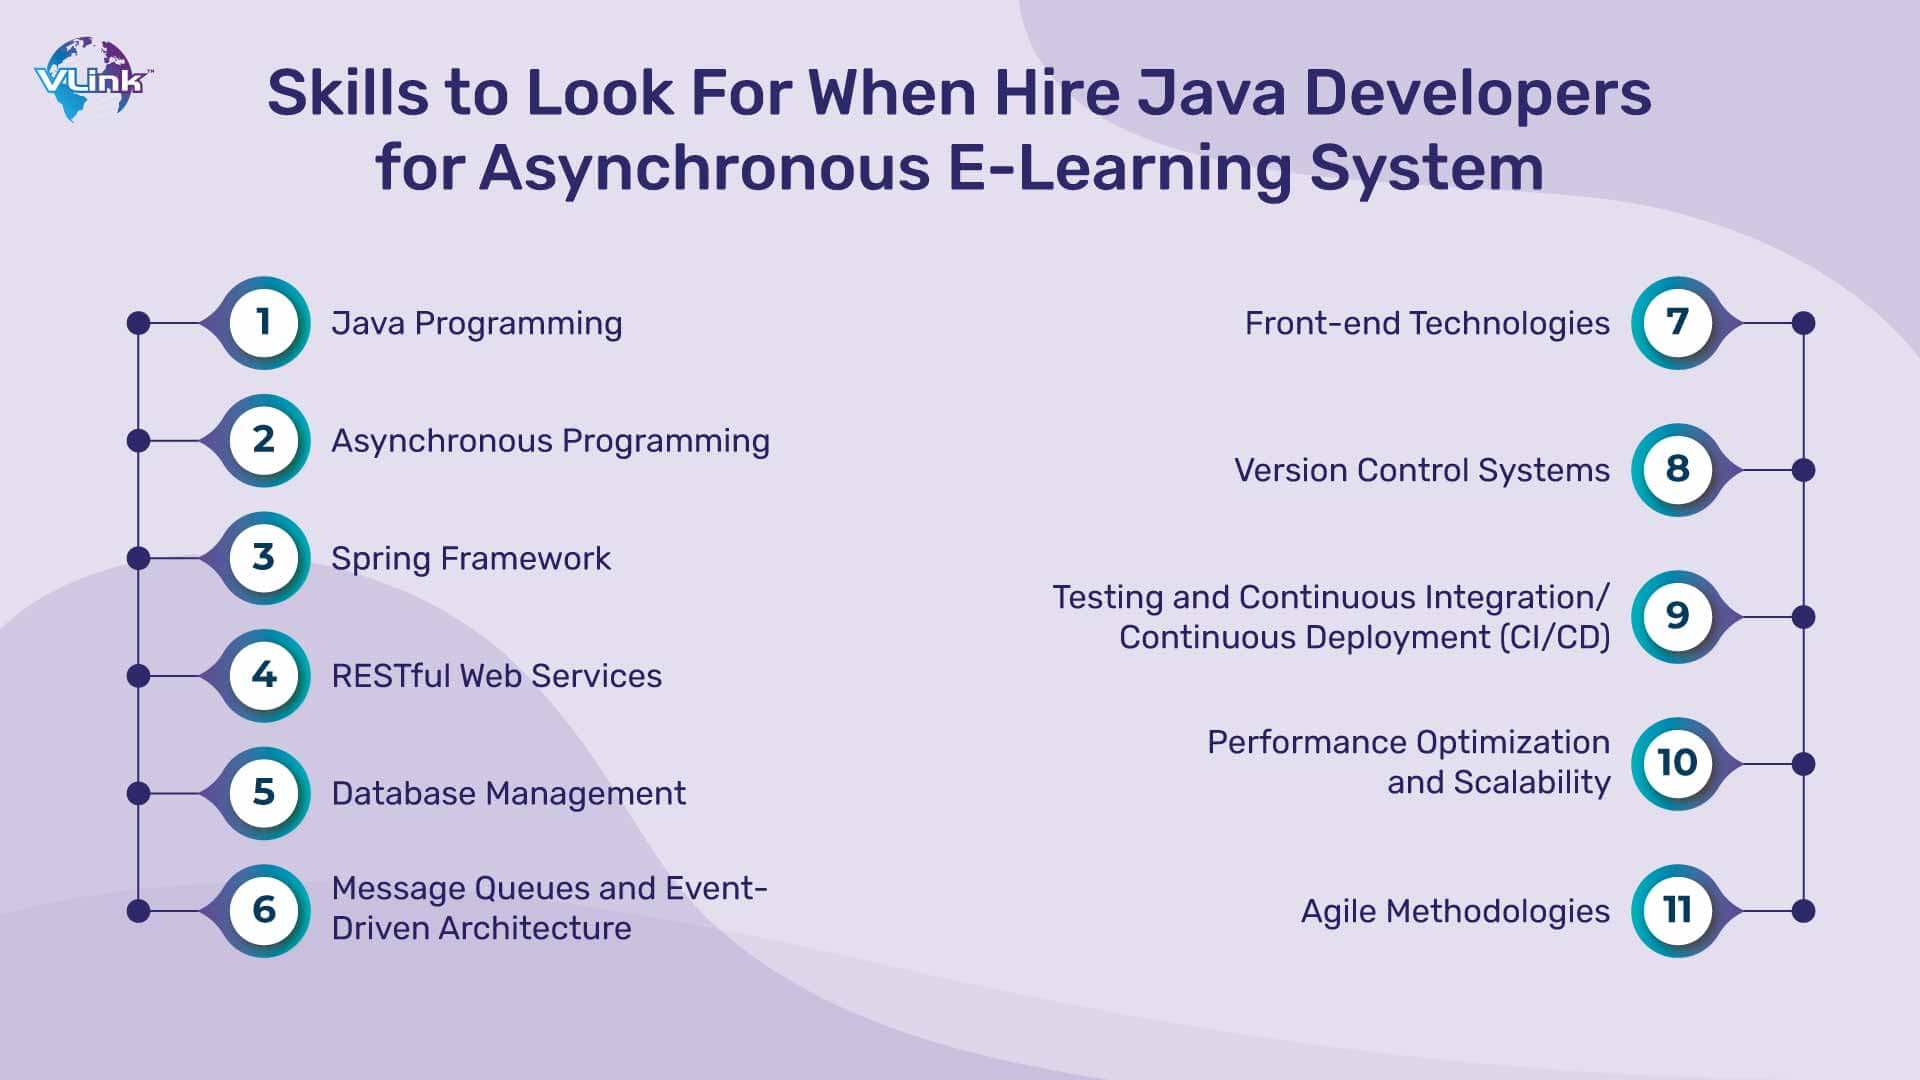 Skills to Look for When Hire Java Developers for Asynchronous E-Learning System